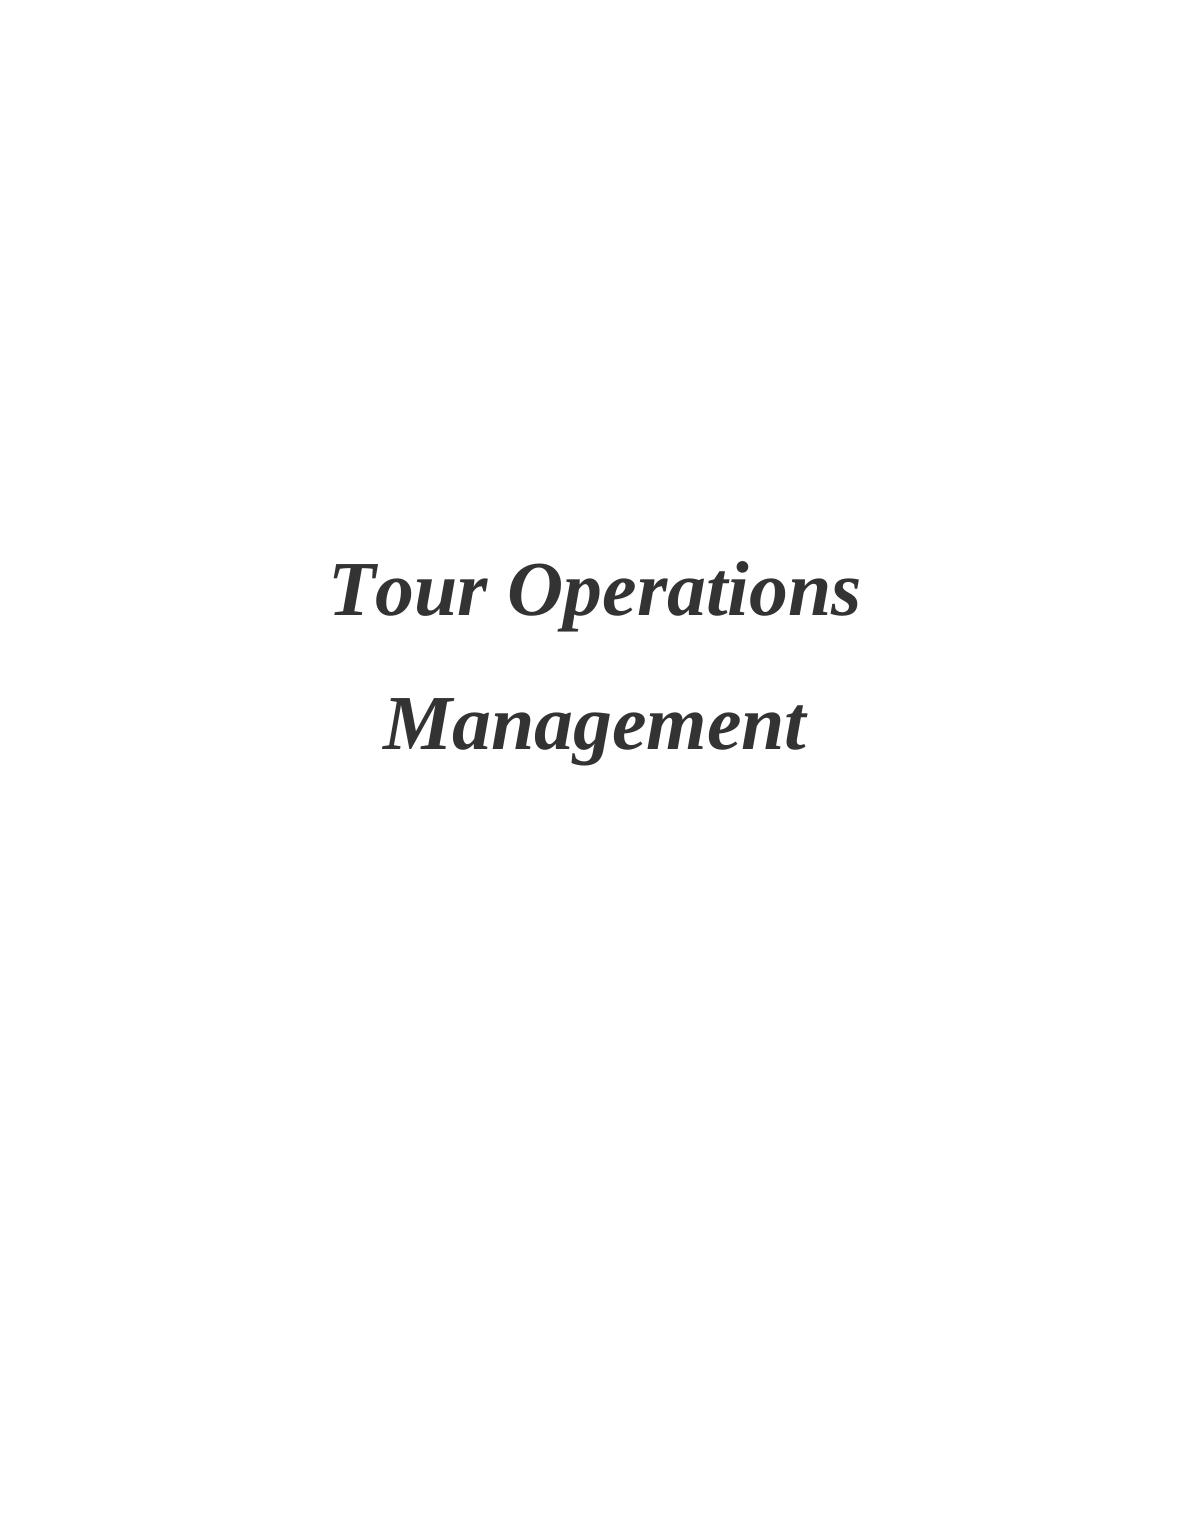 Tour Operations Management InTRODUCTION 1 TASK 11 Covered in Leaflet_1